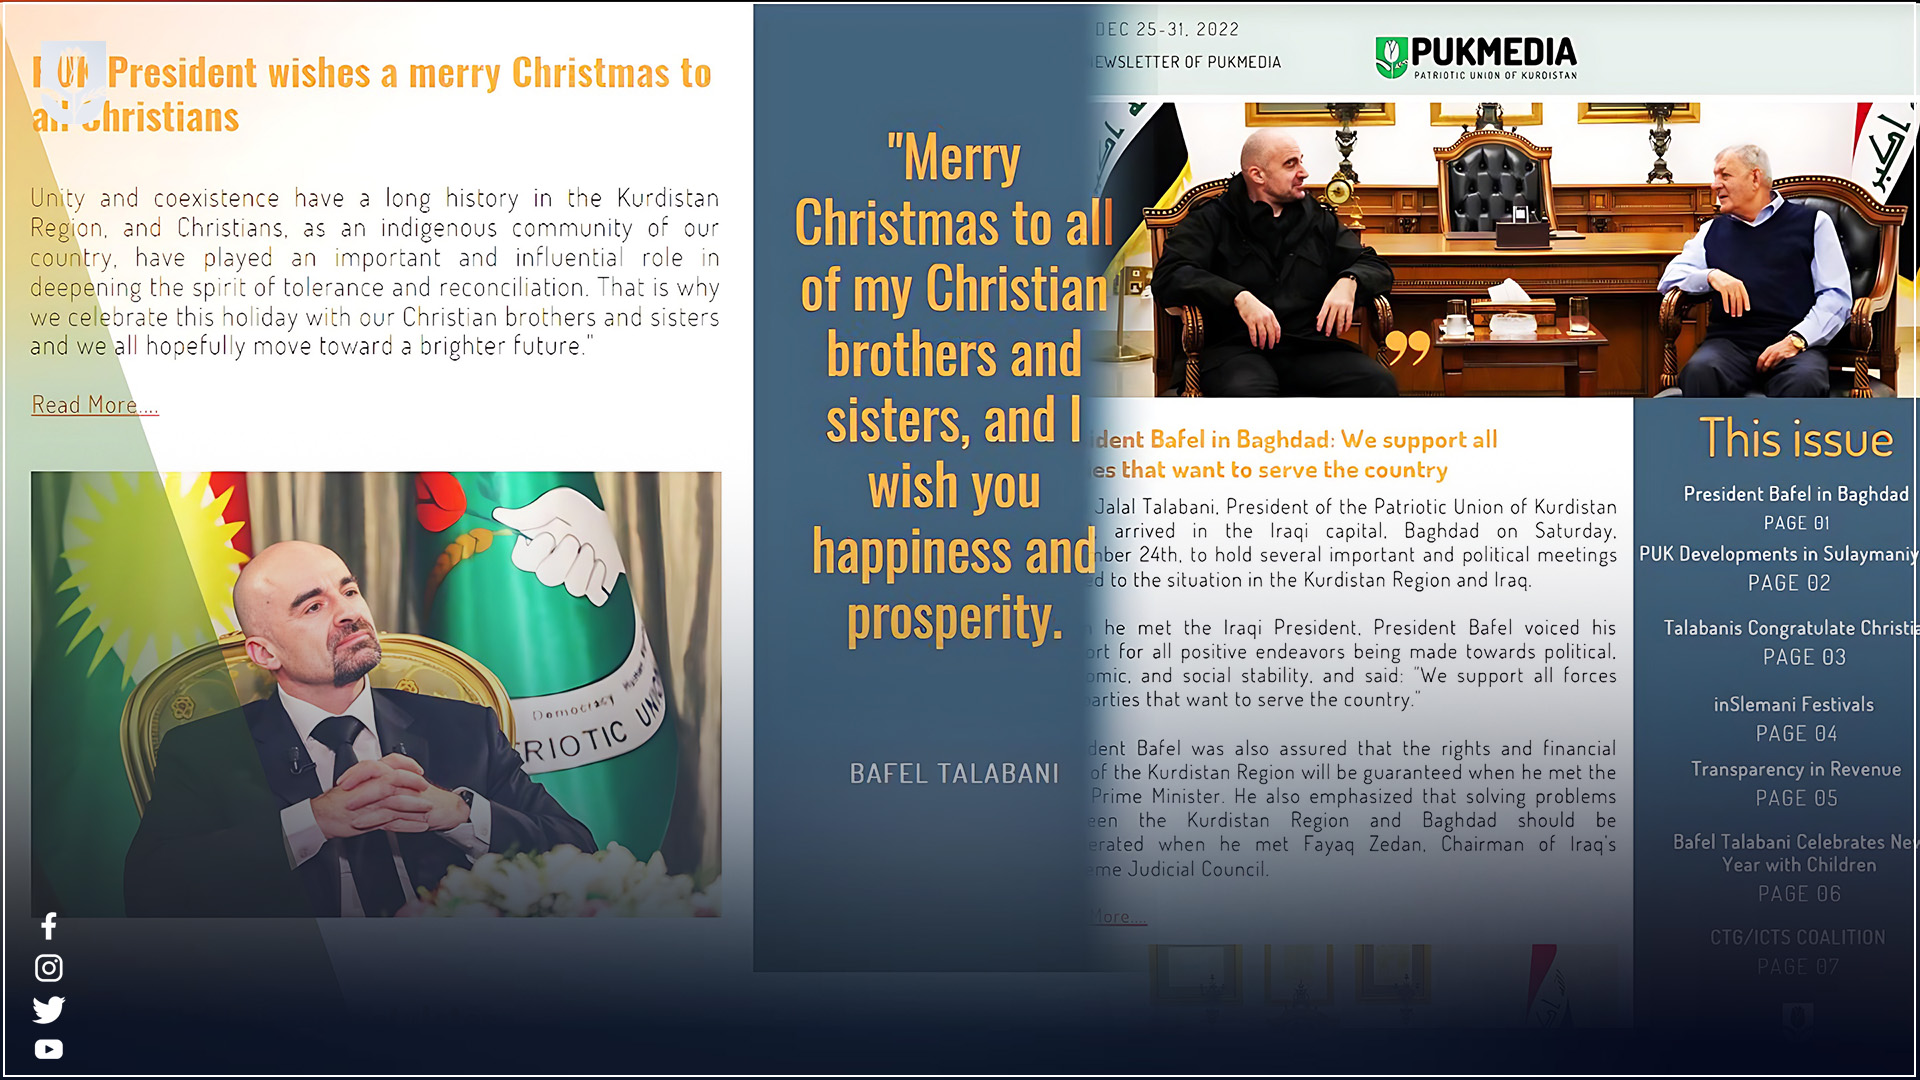 The second issue of PUKMEDIA's newsletter.